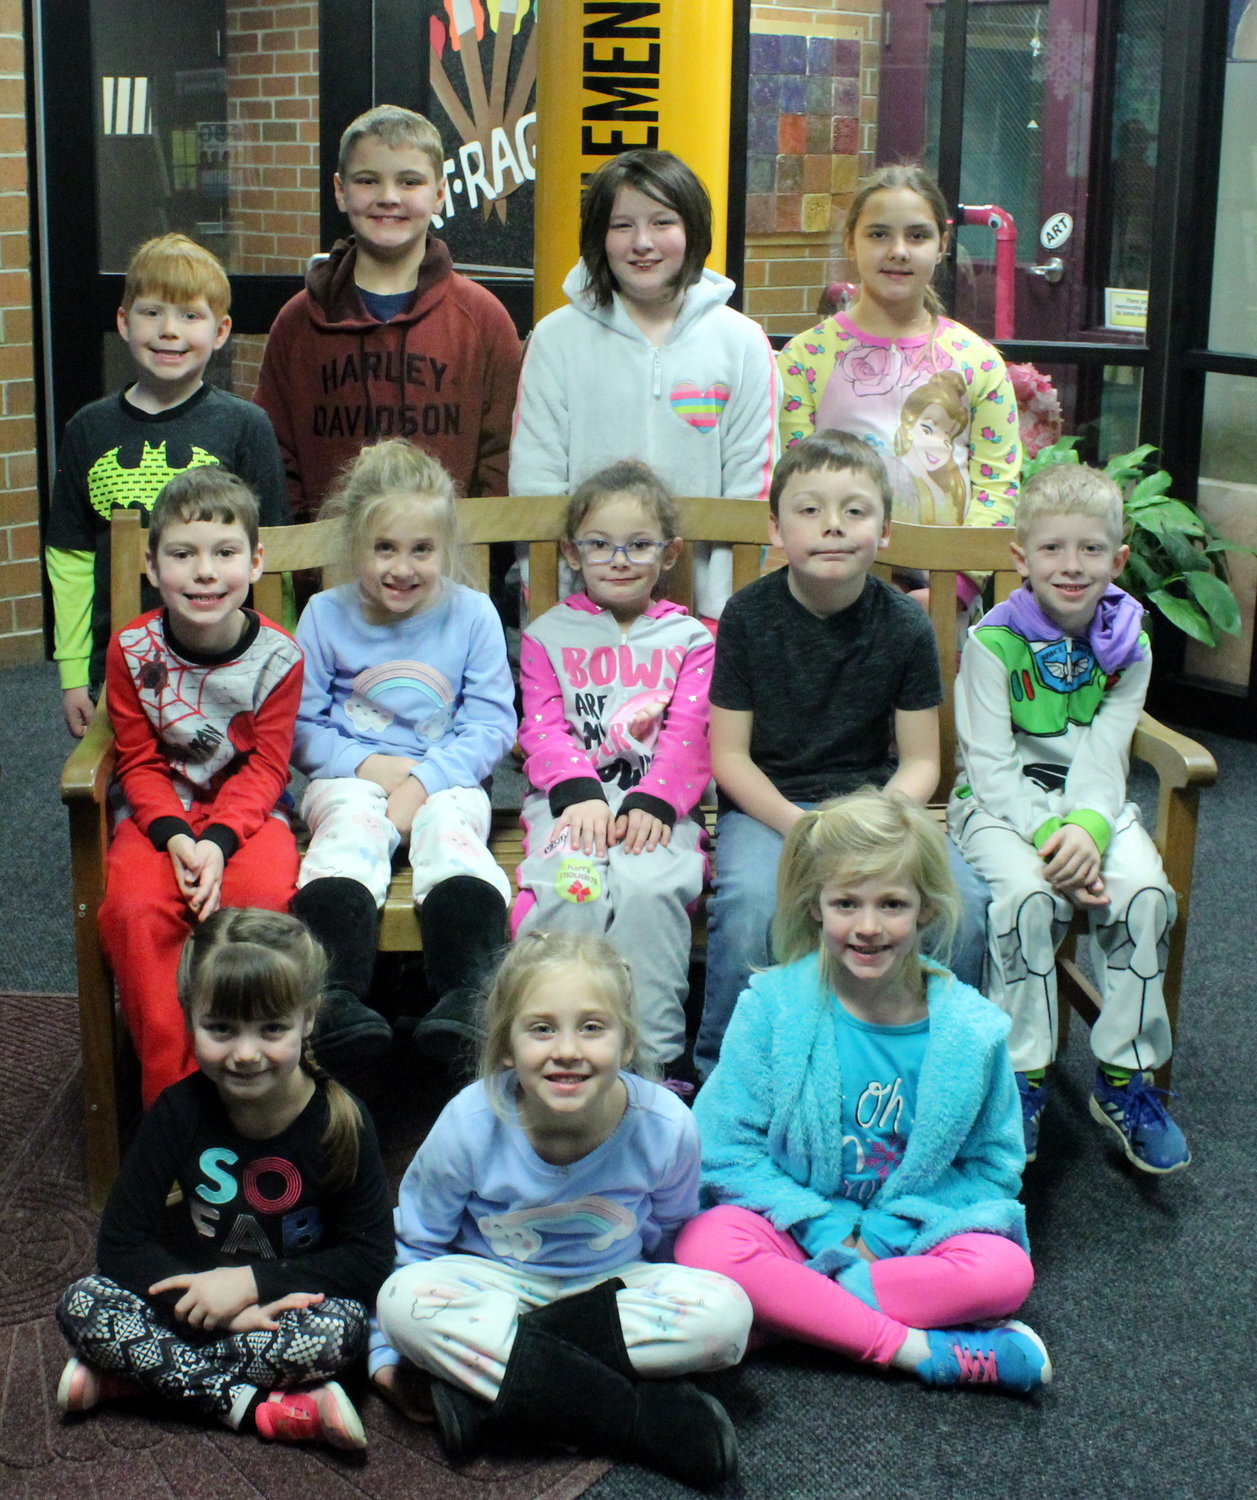 Students participating in the Warrior Watch program are, from left, front row, Petra Schmeltz McGill, Emma HIll and Cobie McCrory; and back row, Aidan Crowder, Abby Hill, Serenity Stanley, Brekyn Posthauer, and Jaxton Shannon; and back row, Koltyn Norman, Eli Thompson, Lorelei Long and Tessa Thompson.